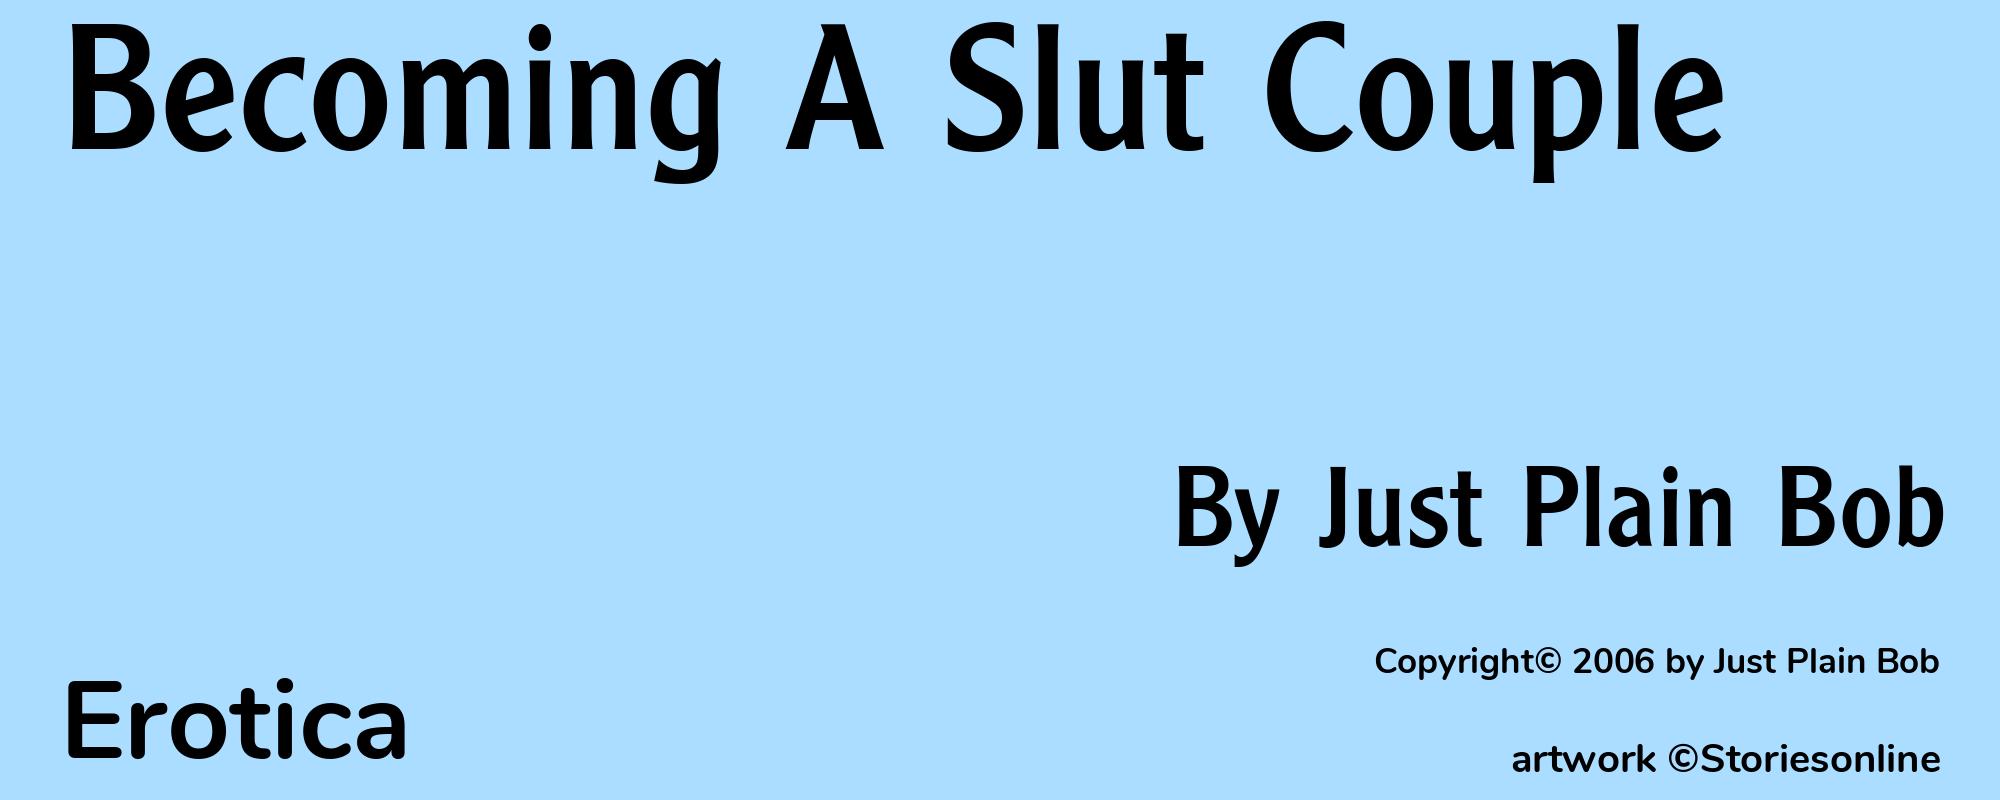 Becoming A Slut Couple - Cover